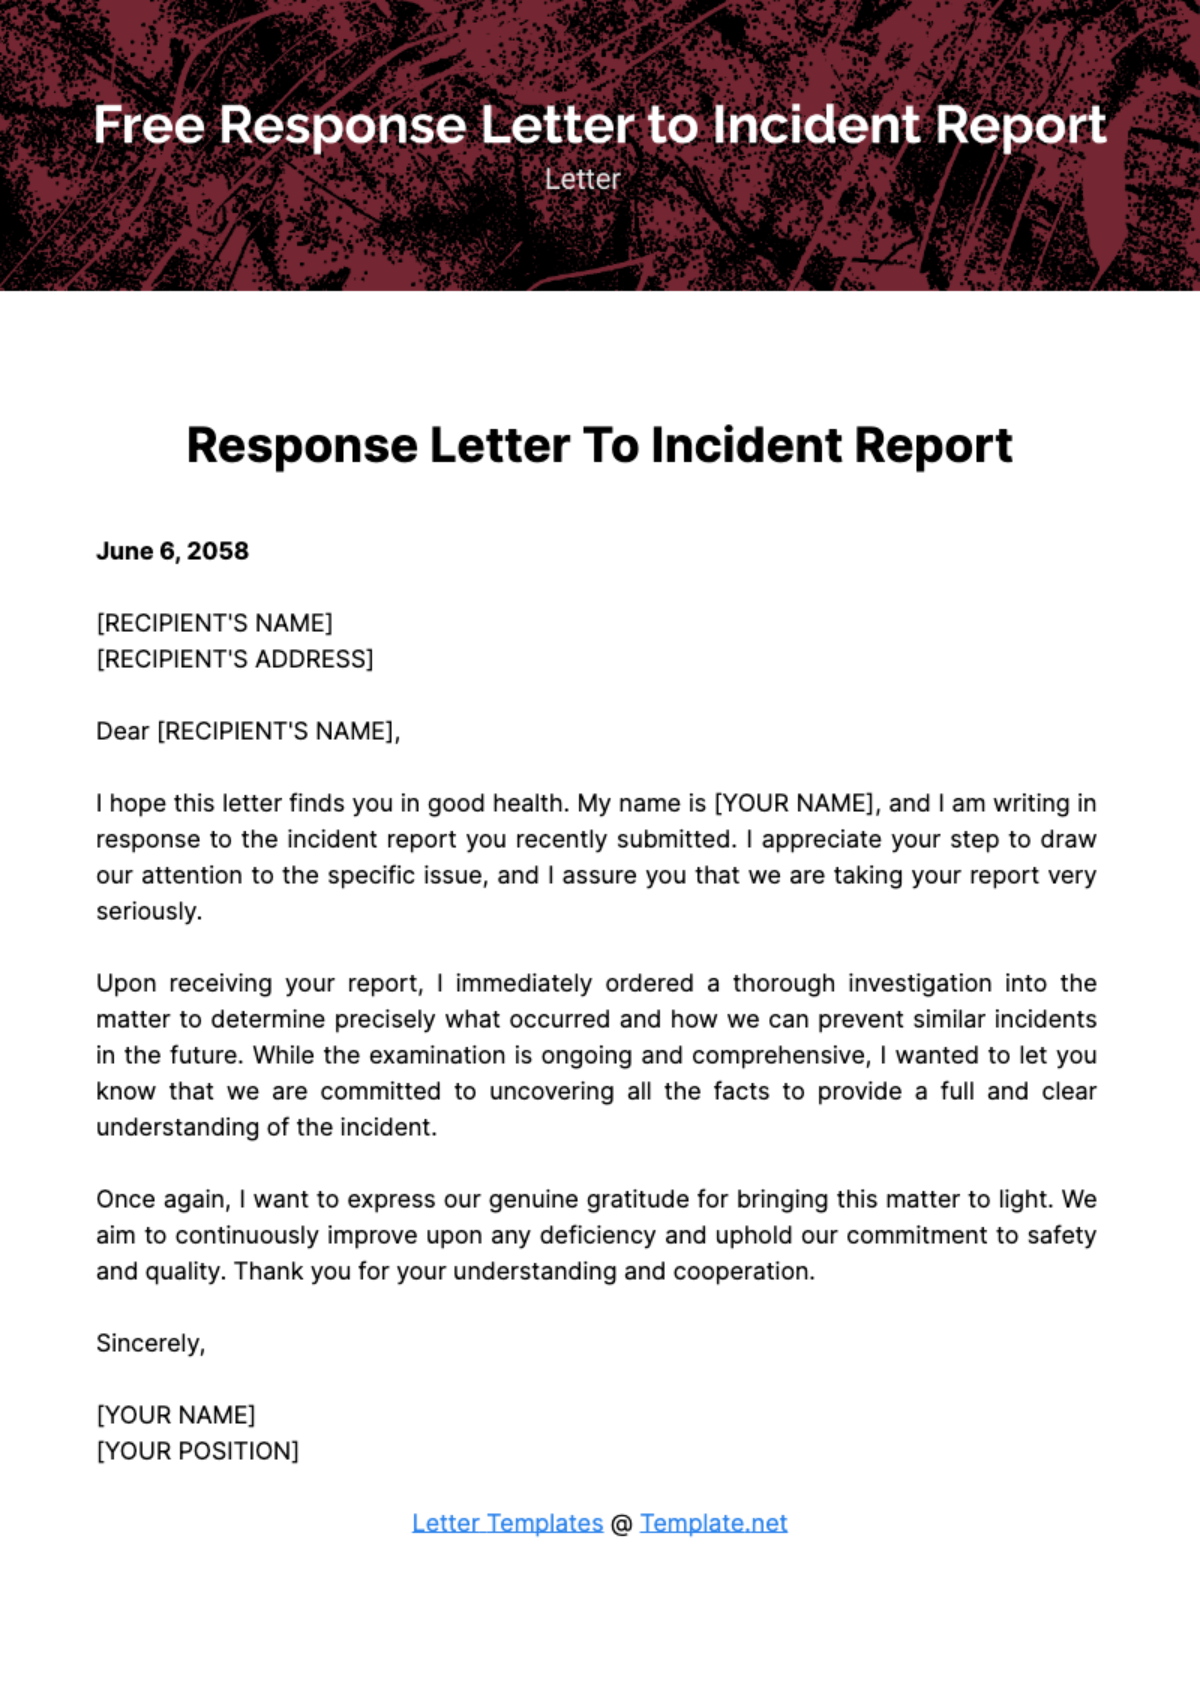 Response Letter to Incident Report Template